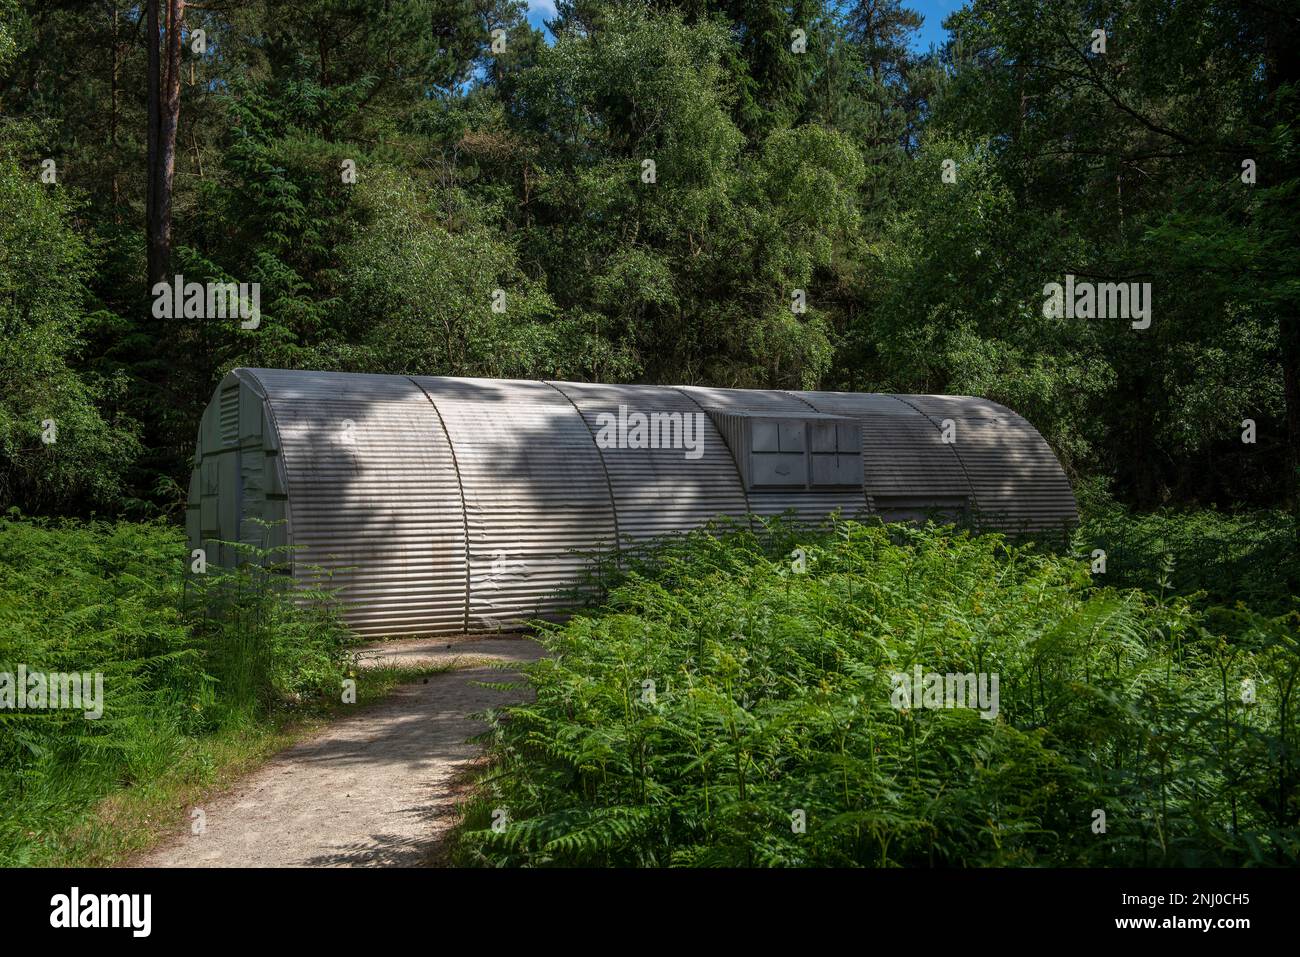 The cast concrete interior sculpture of a Nissen hut by artist Rachel Whiteread in the Dalby Forest near Pickering, North Yorkshire, UK Stock Photo